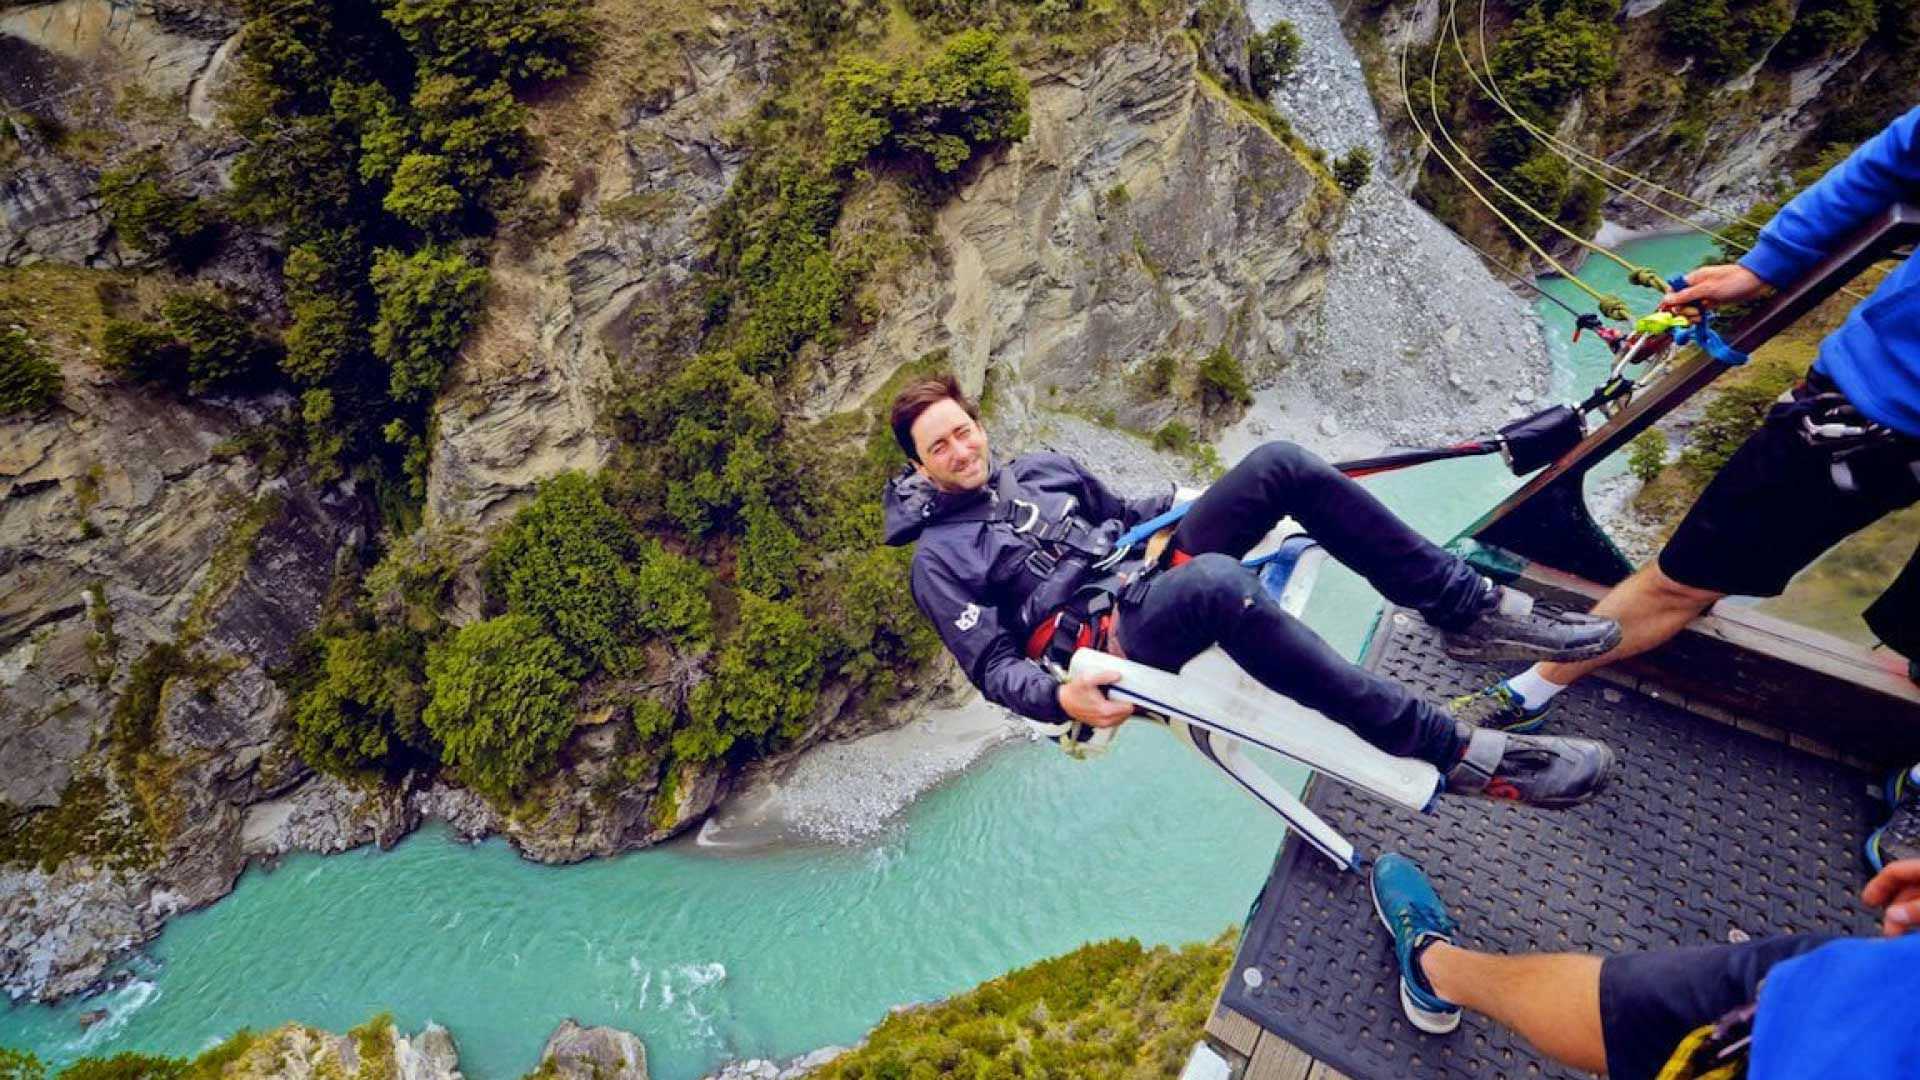 Man on a chair about to be pushed off the canyon swing